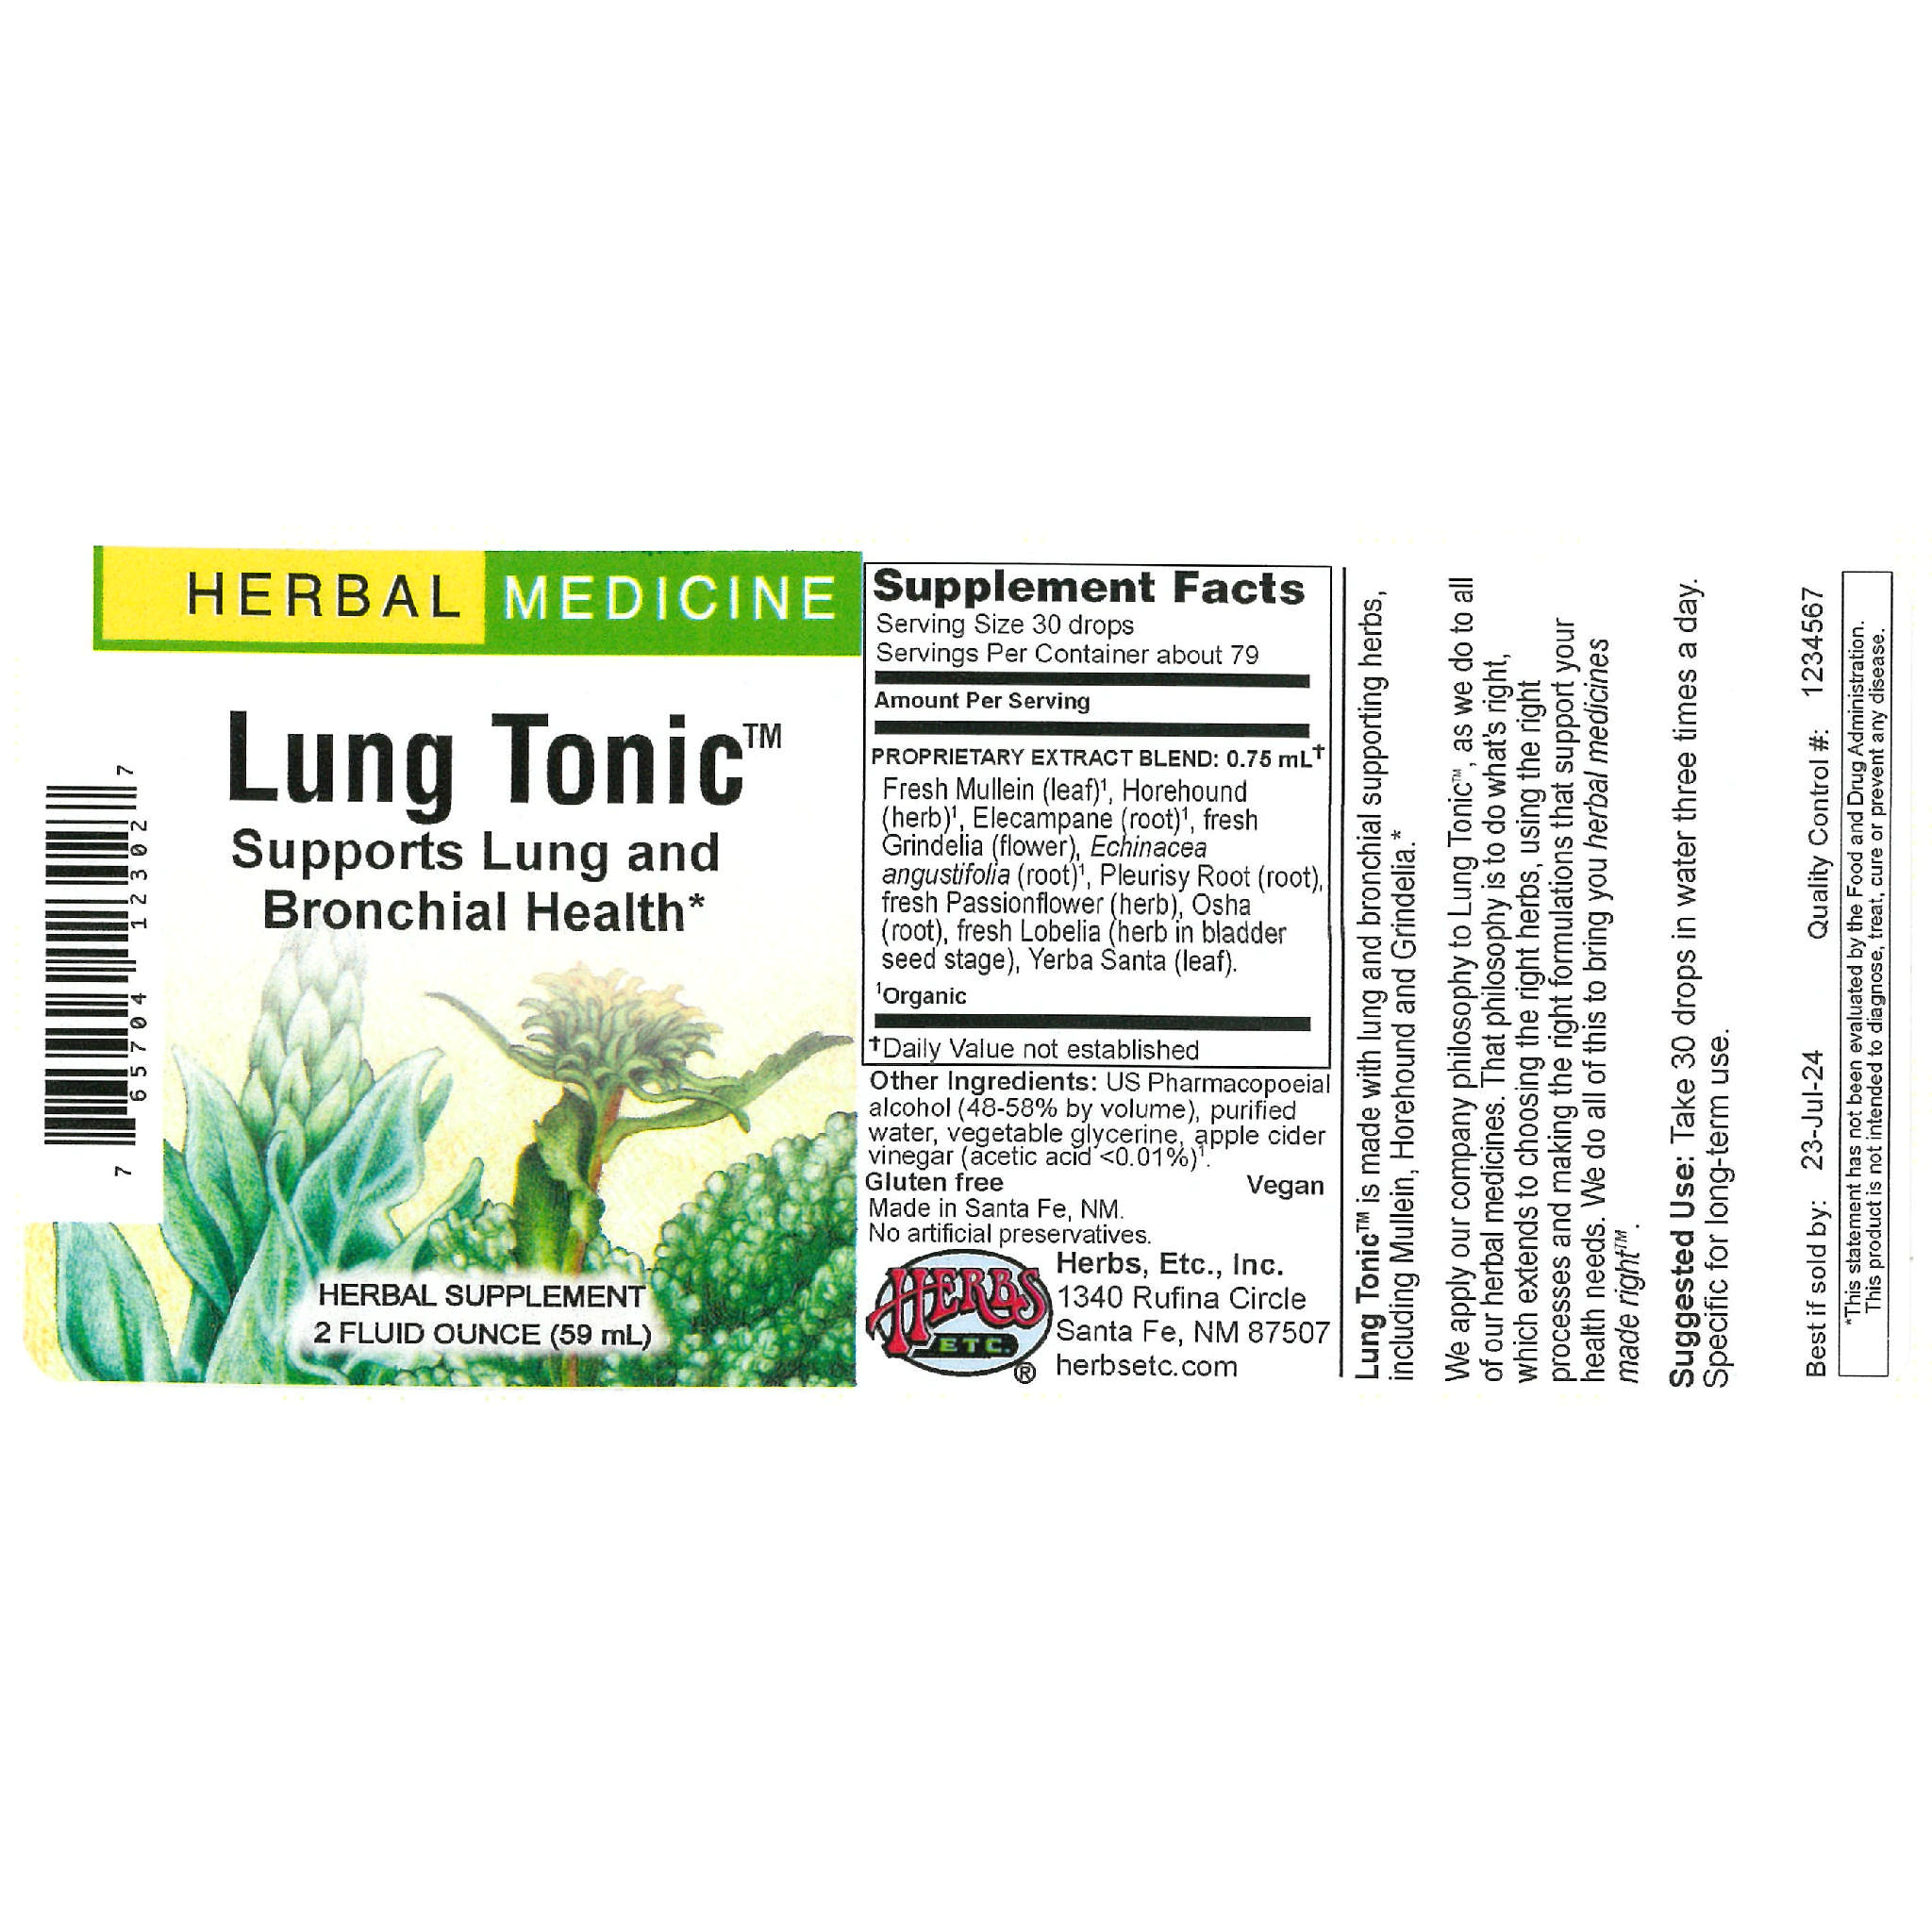 Herbs Etc - Lung Tonic